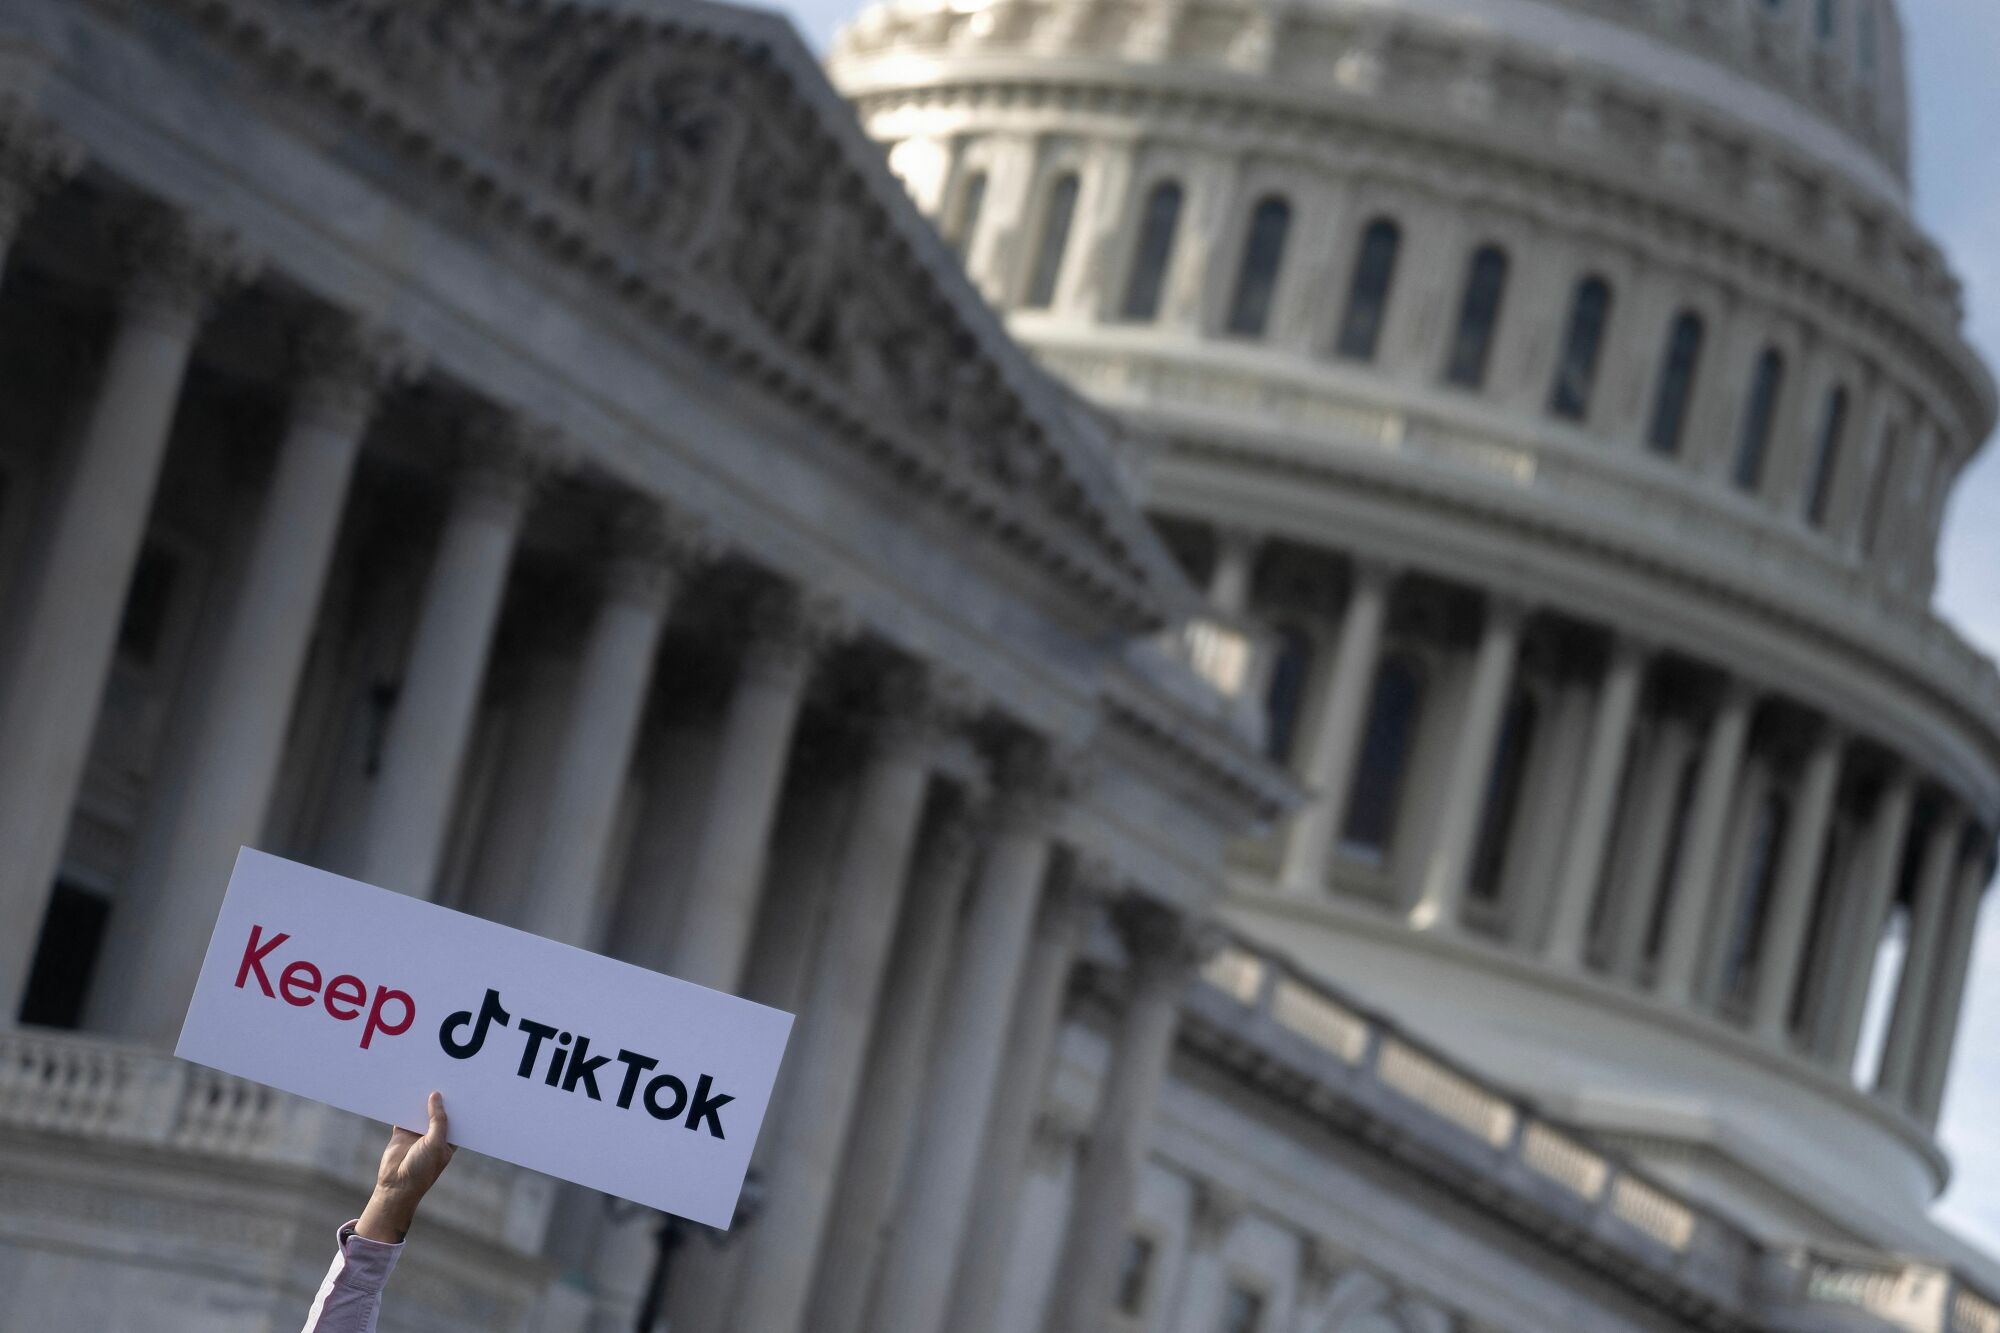 A person holds a sign during a press conference about their opposition to a TikTok ban on Capitol Hill in Washington, DC on March 22, 2023.